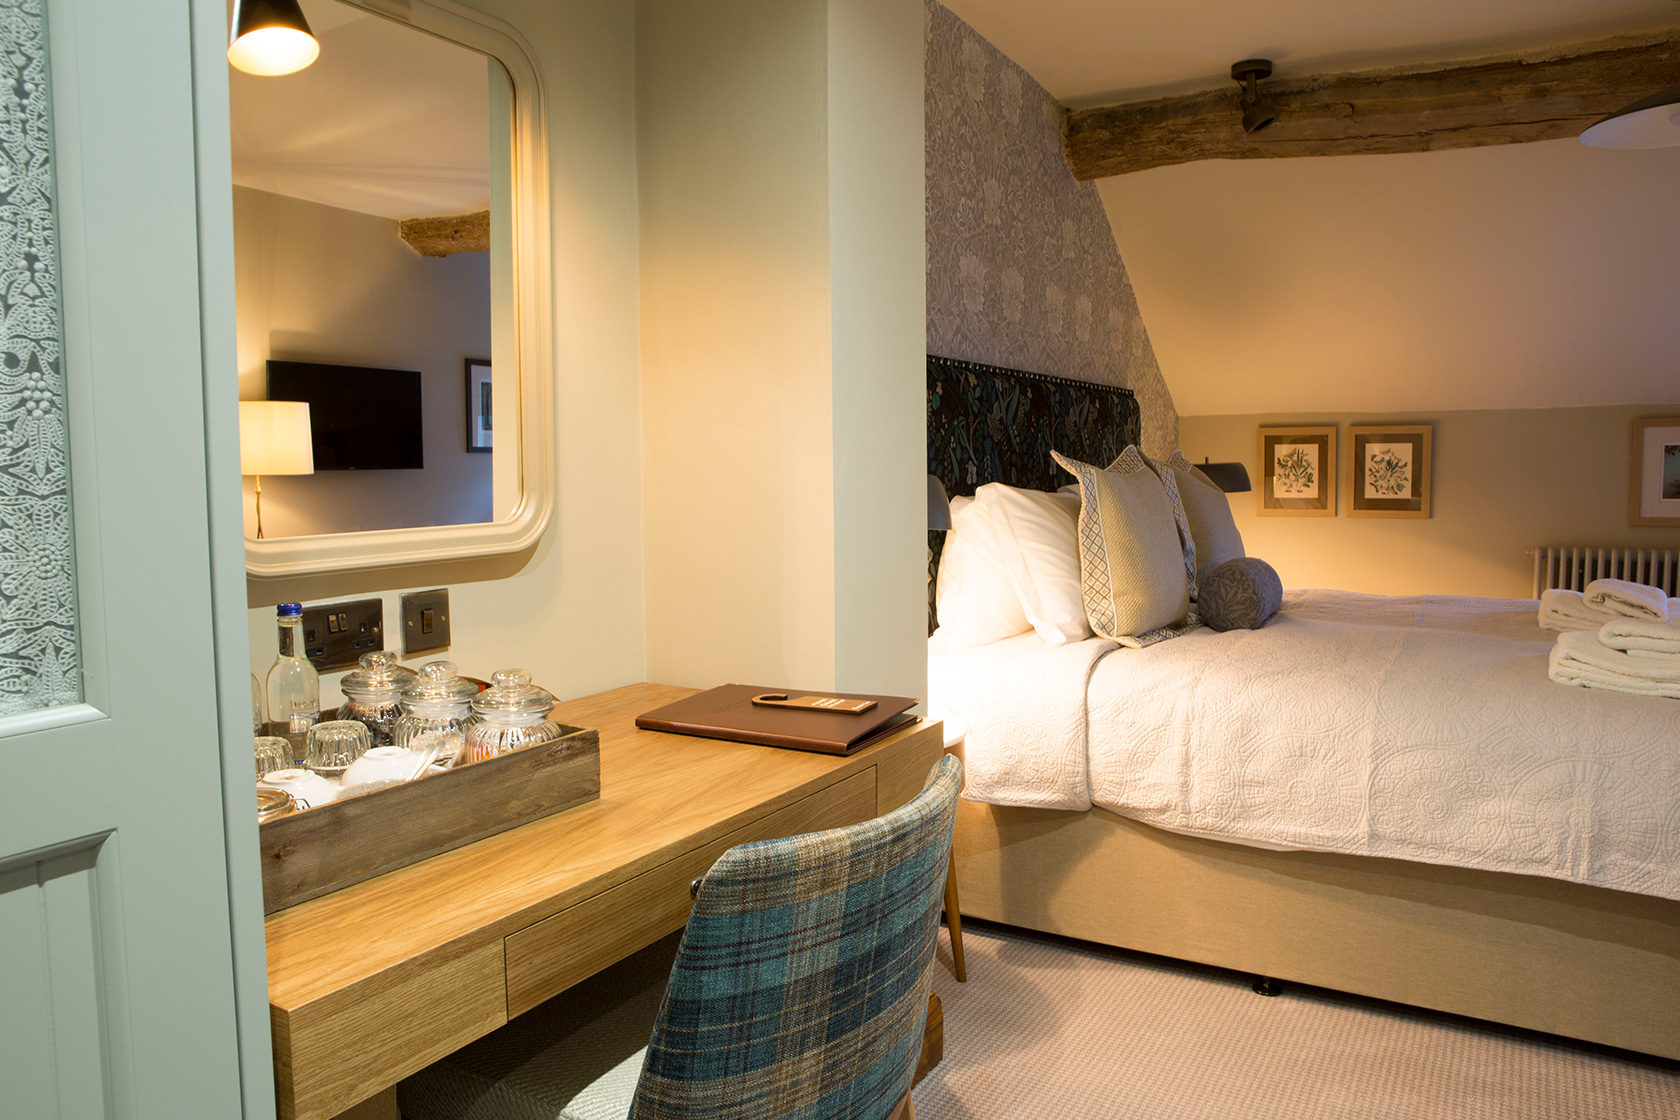 Great amenities and extra room to spread out in our premium bedrooms at the Legh Arms